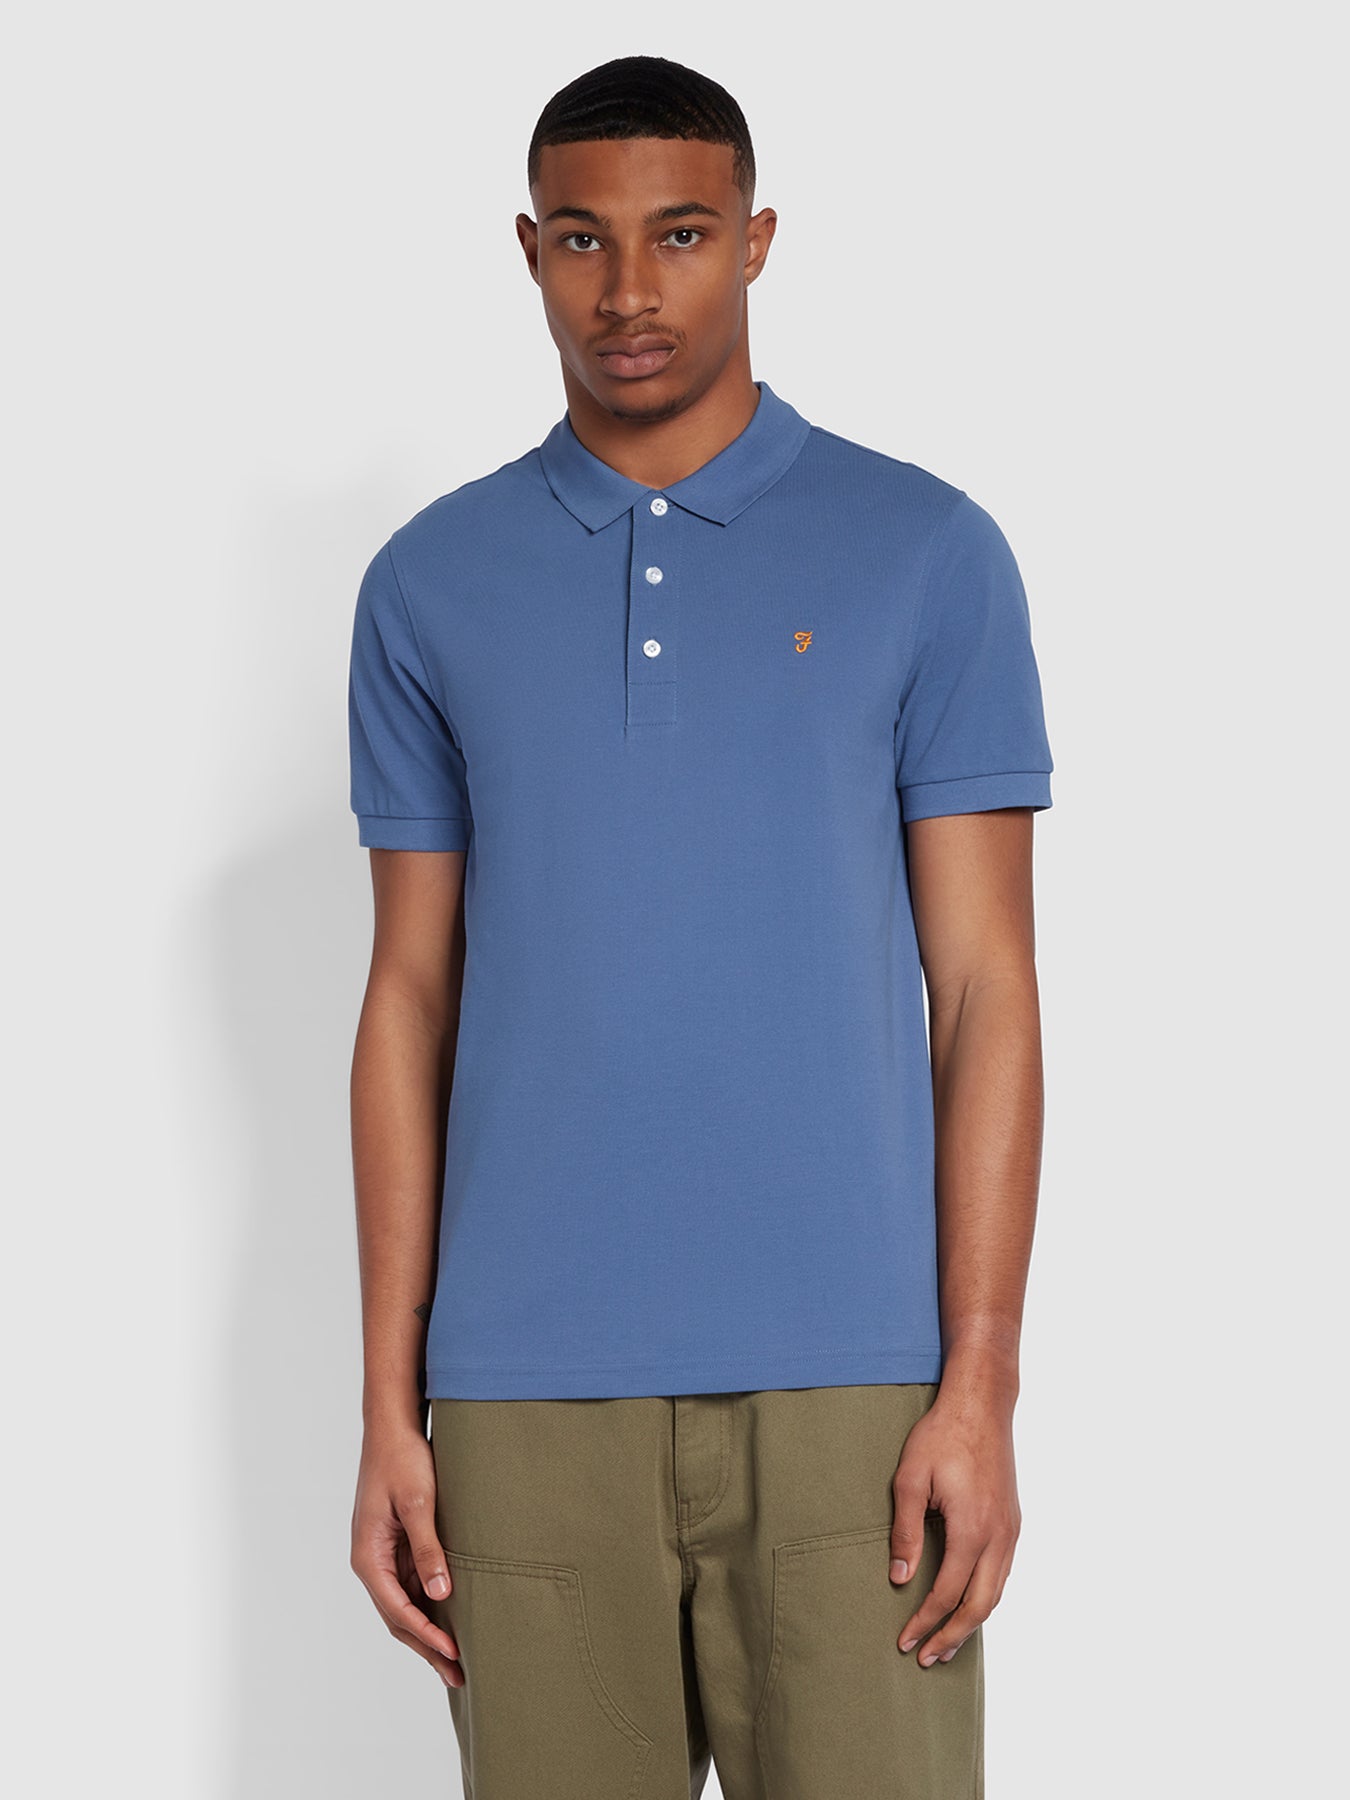 View Blanes Slim Fit Short Sleeve Polo Shirt In Caribbean Blue information